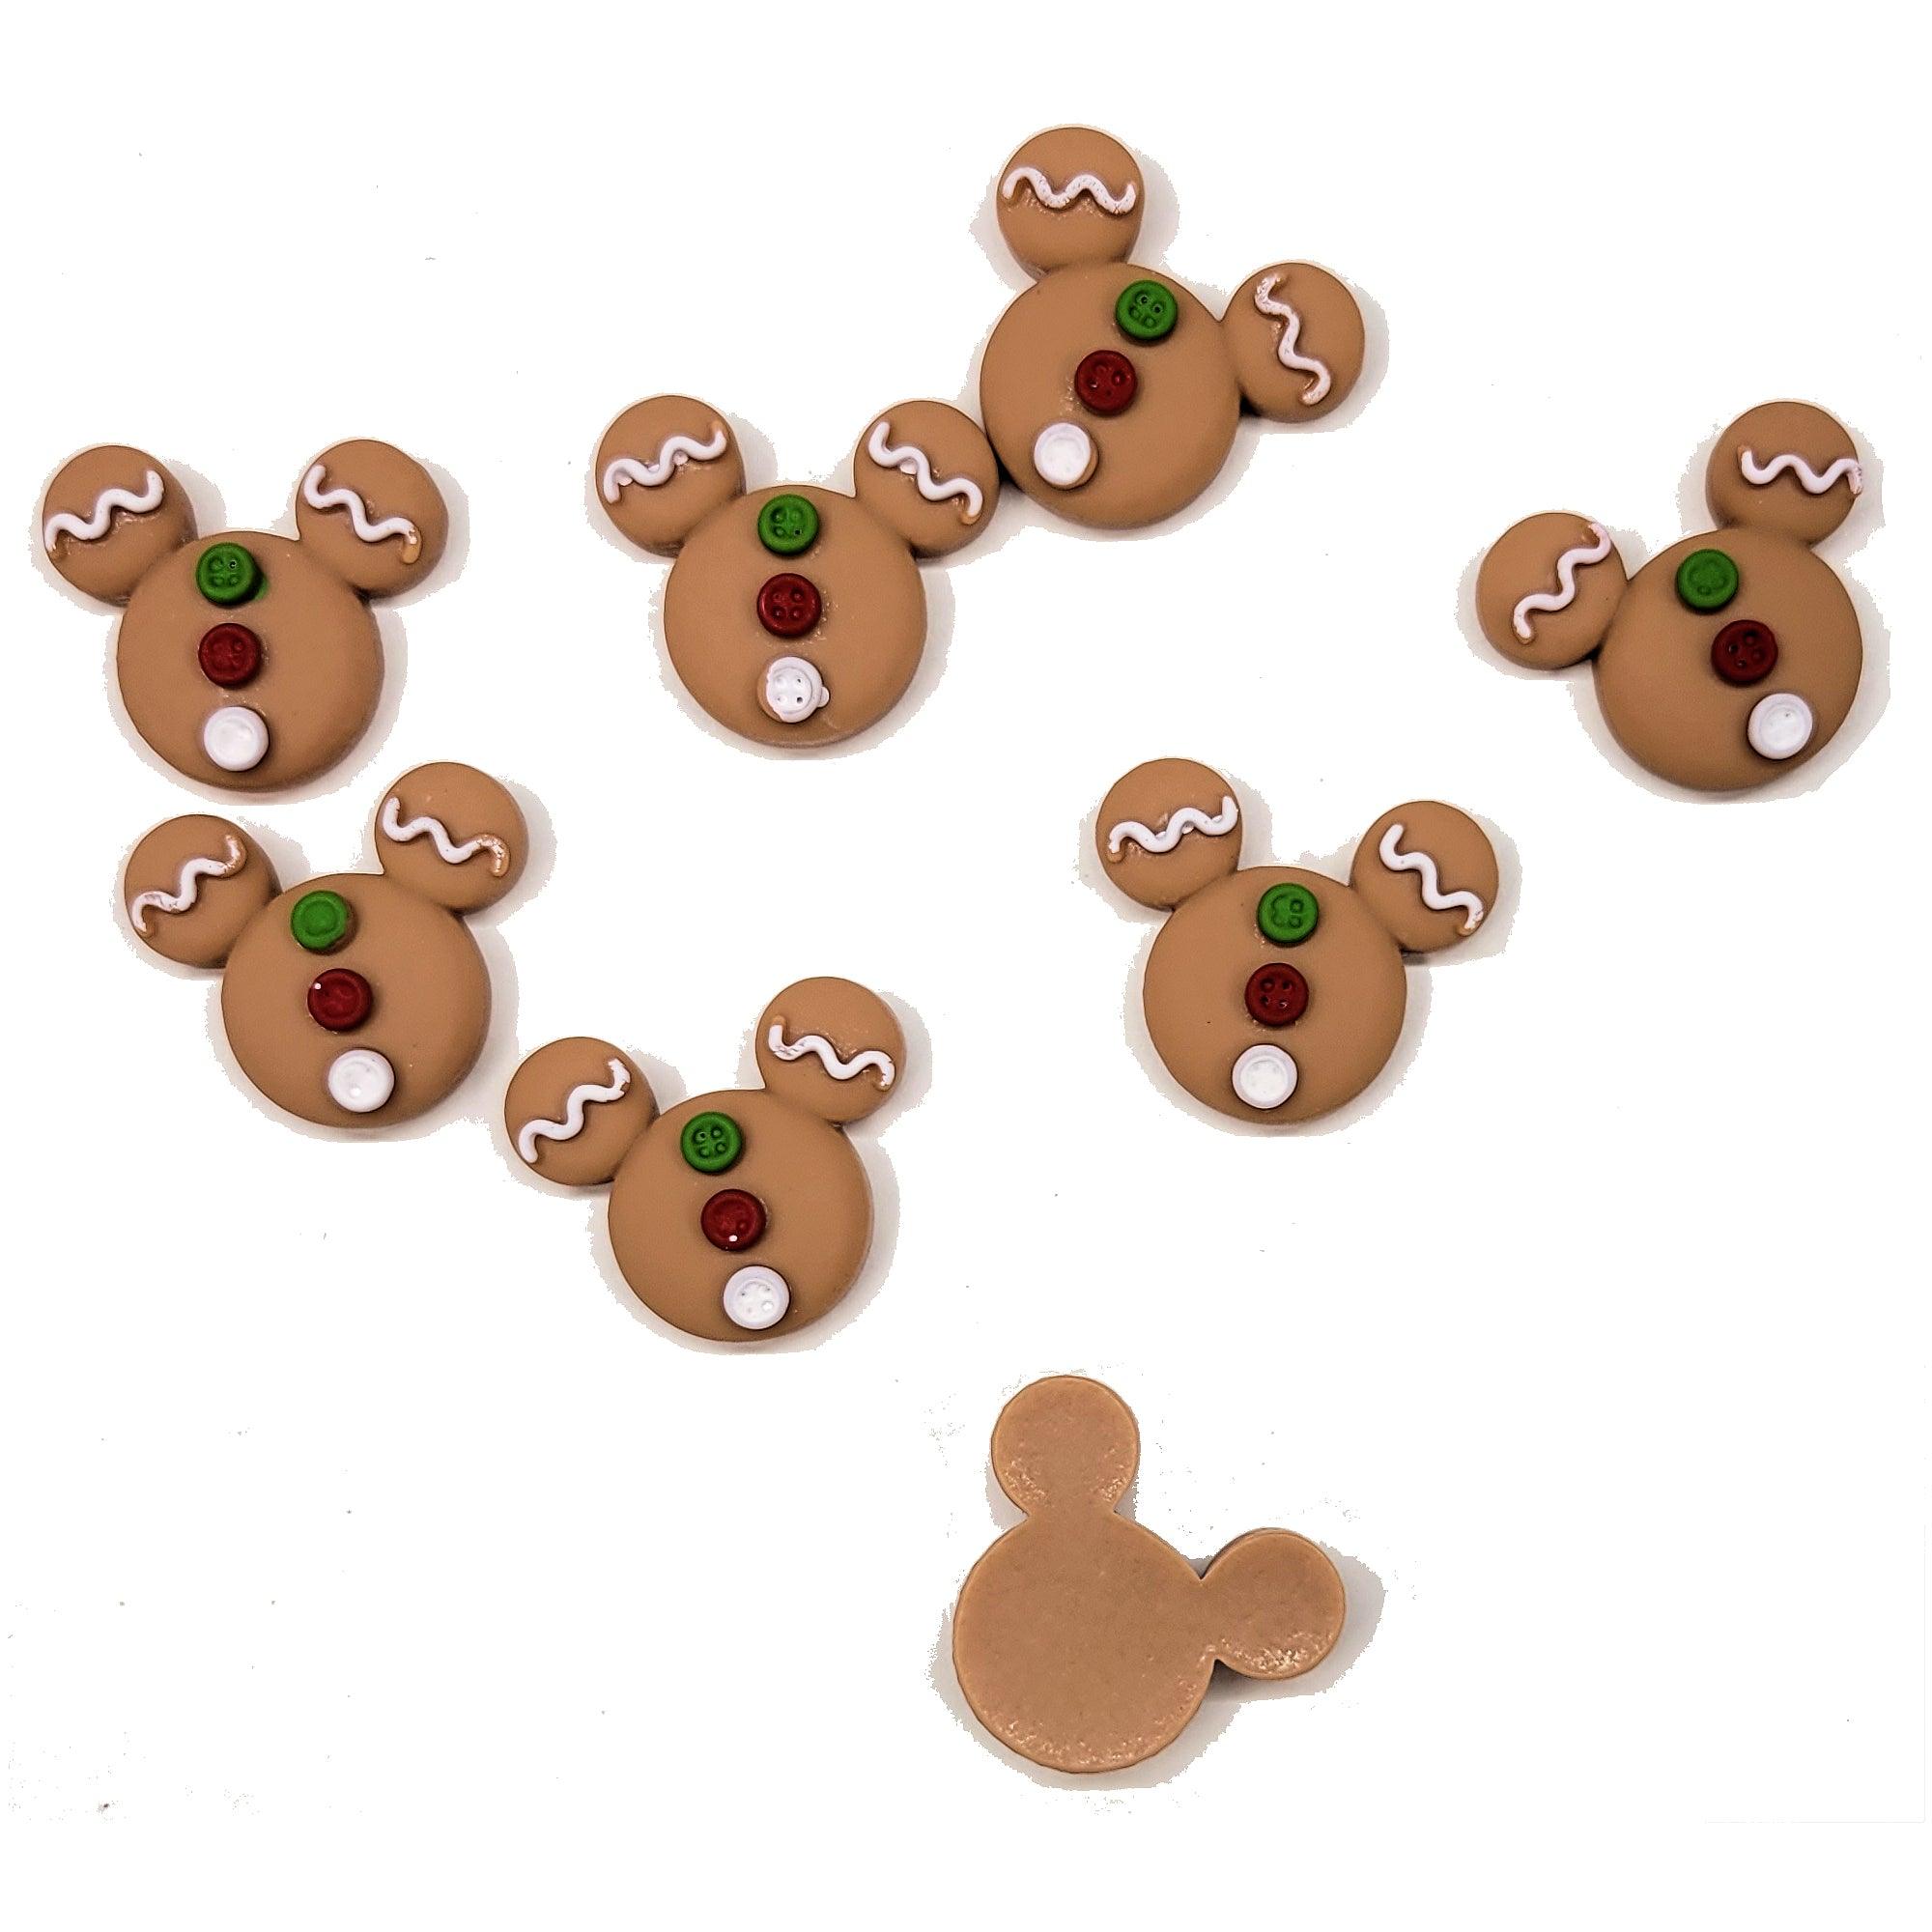 Disneyana Collection Gingerbread Mouse Ears Flatback Scrapbook Buttons by SSC Designs - 8 Pieces